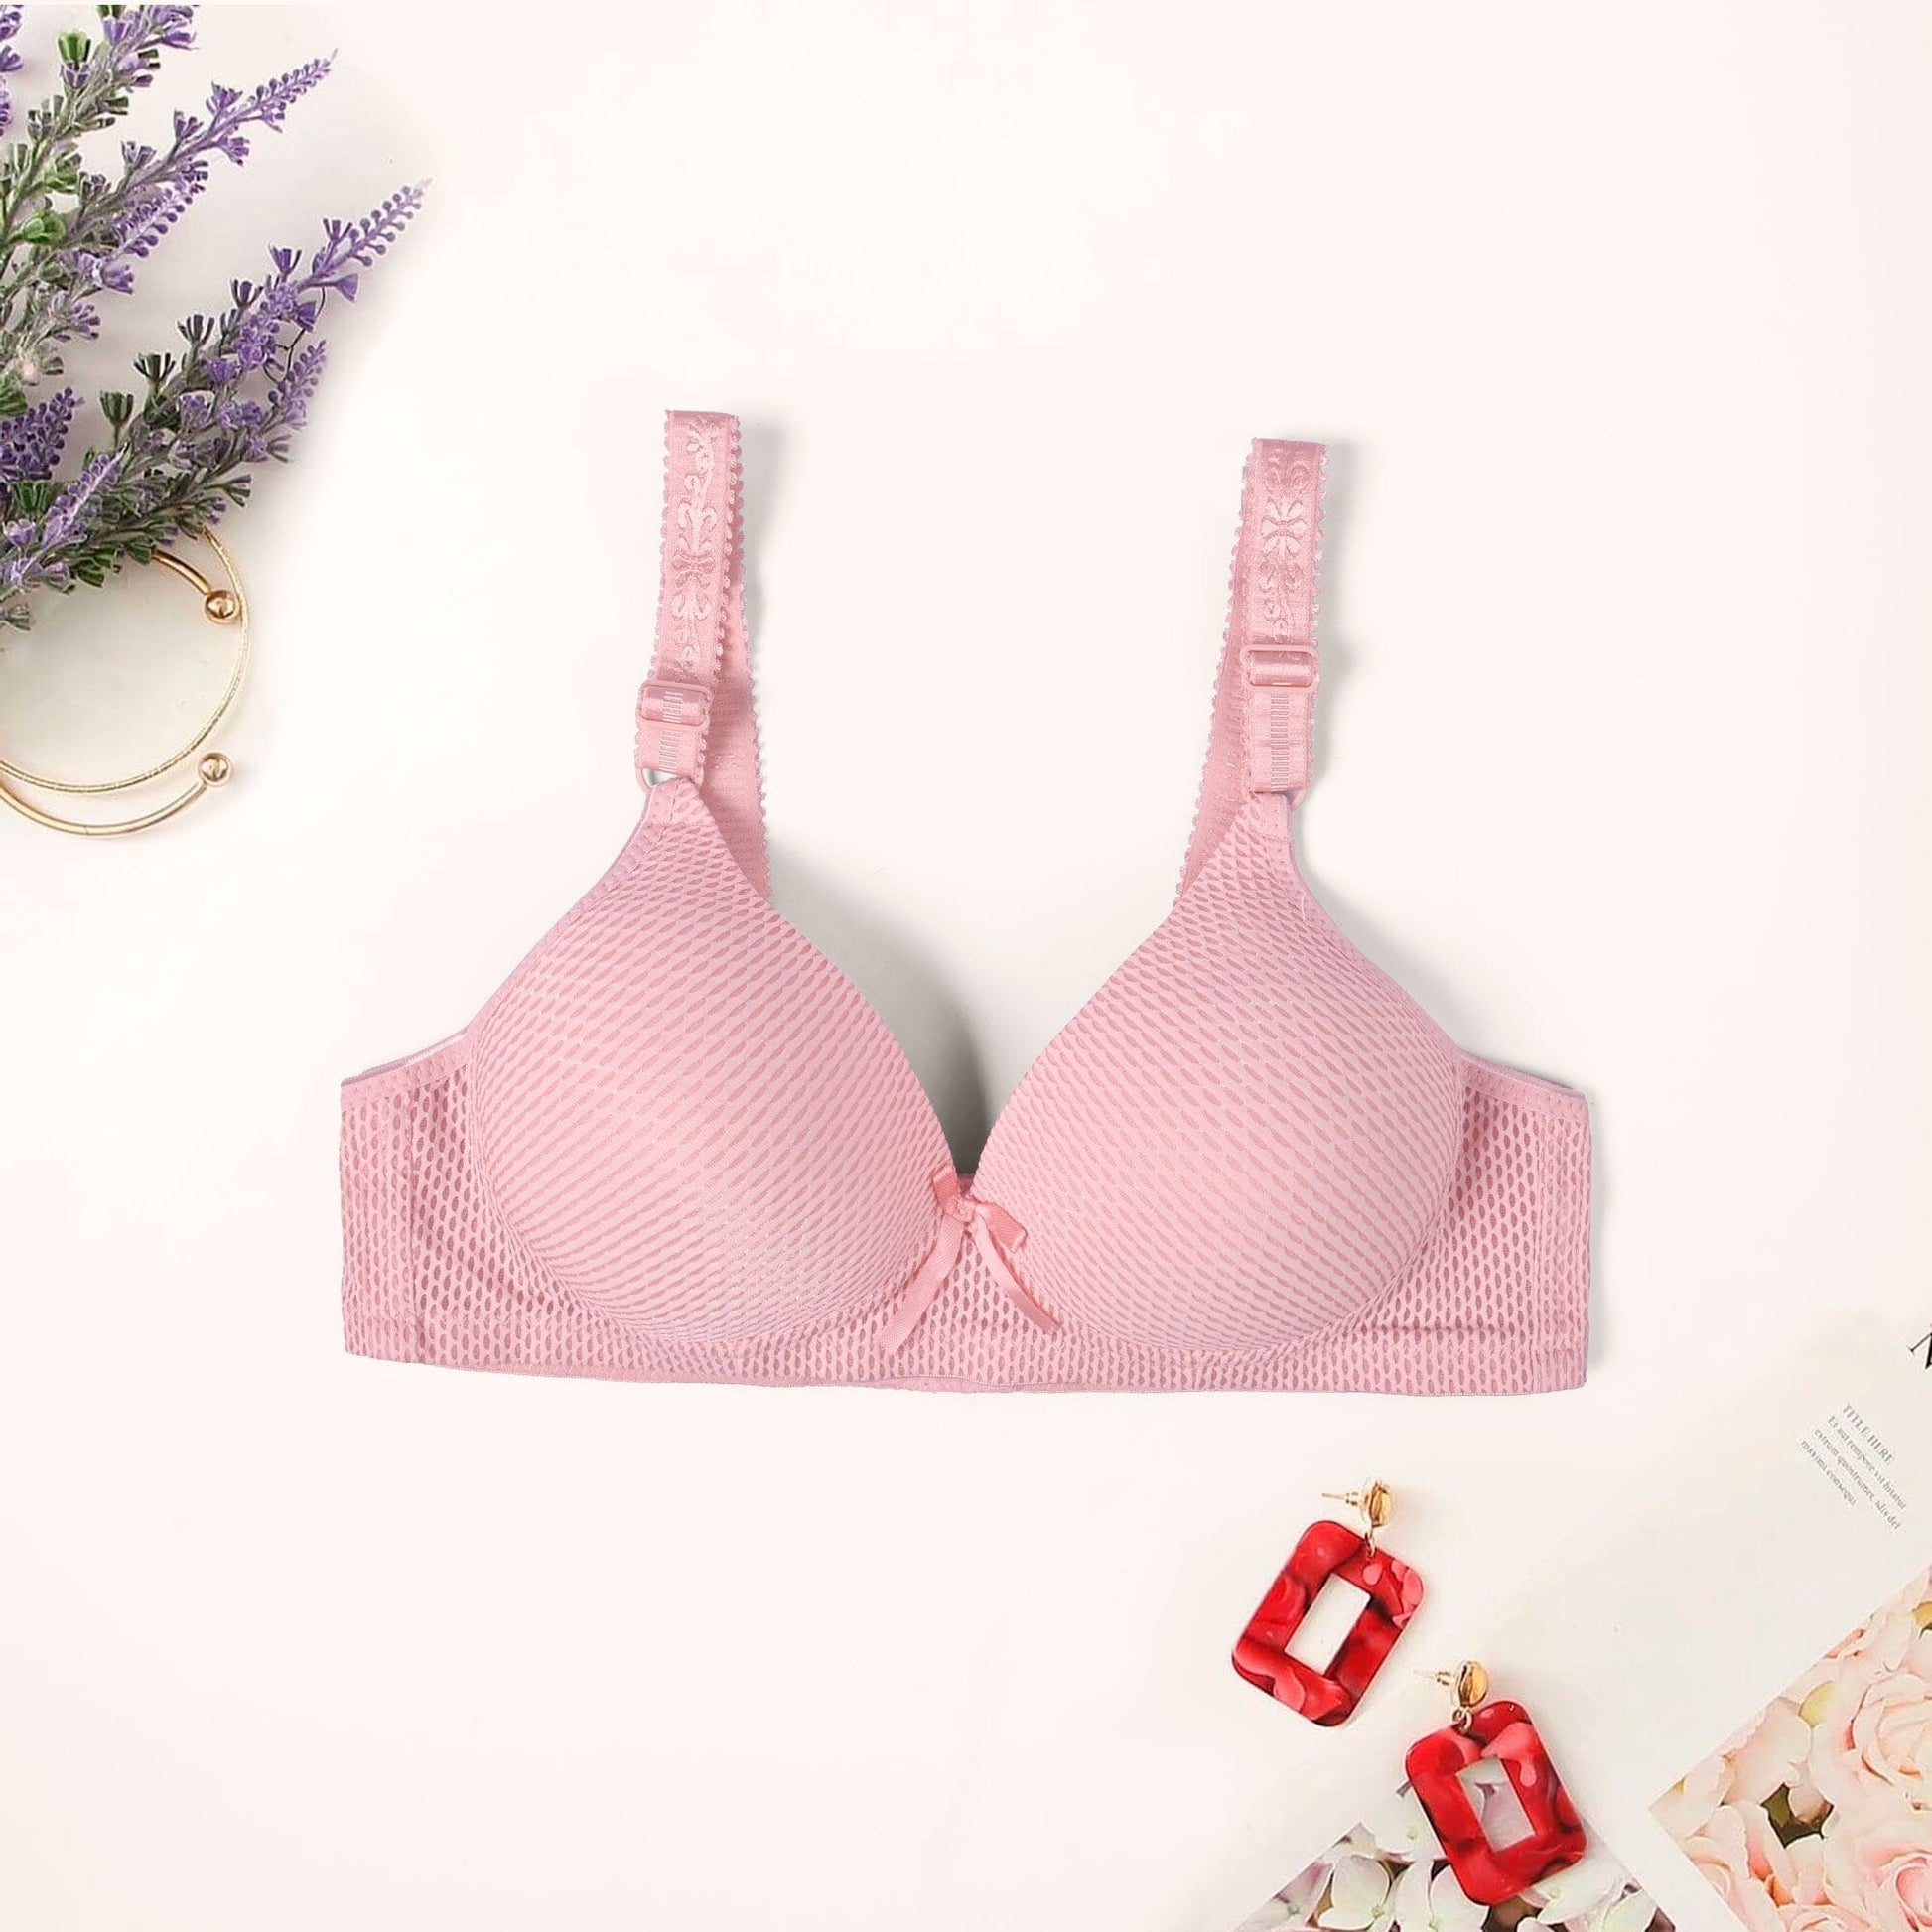 Textured Push-Up Bra with Bow